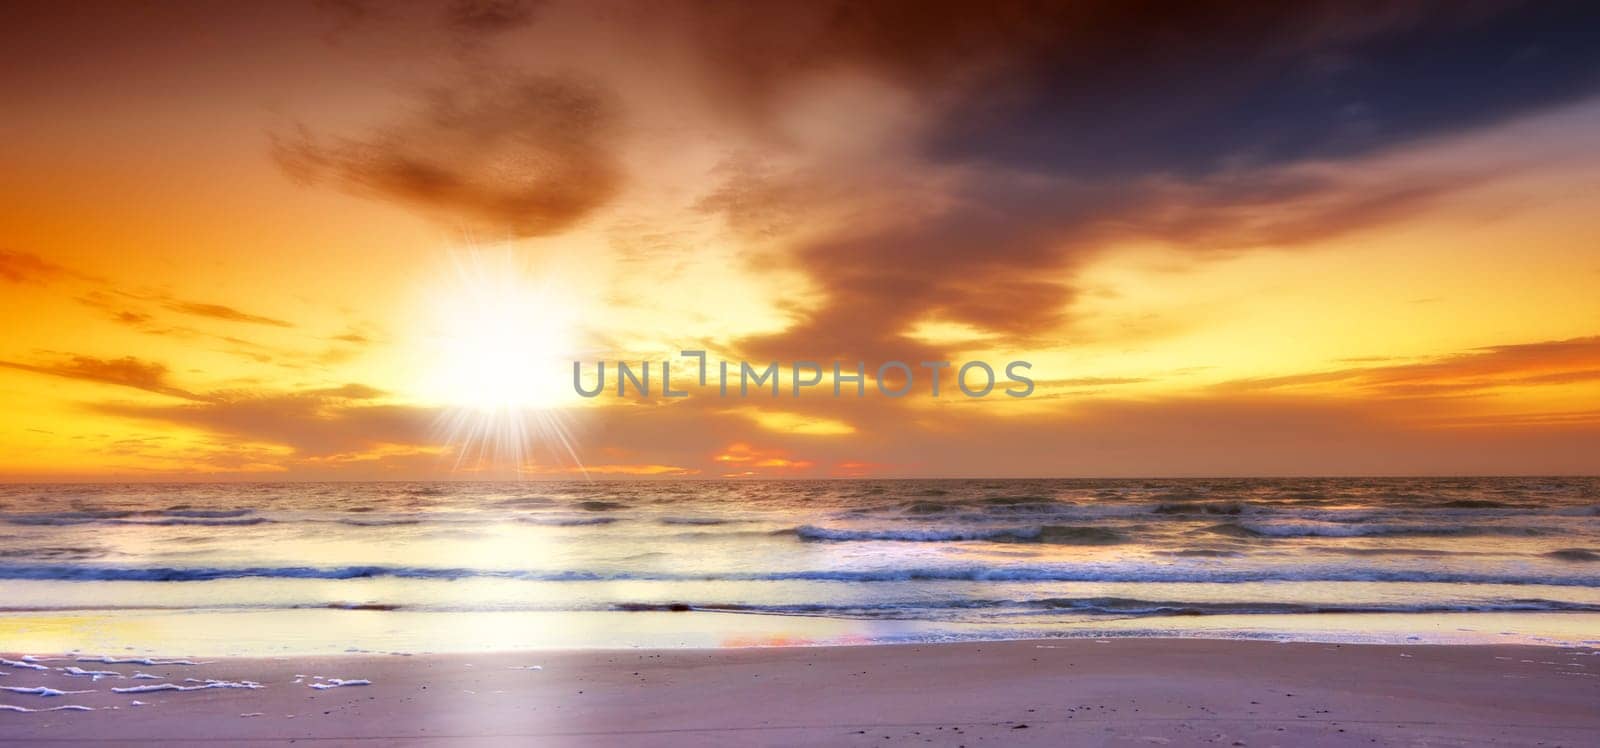 Sky, sunset and sea at morning on the horizon with ocean and water waves landscape. Sunrise, calm weather and summer by the beach with coastline and outdoor environment with the sun in nature.